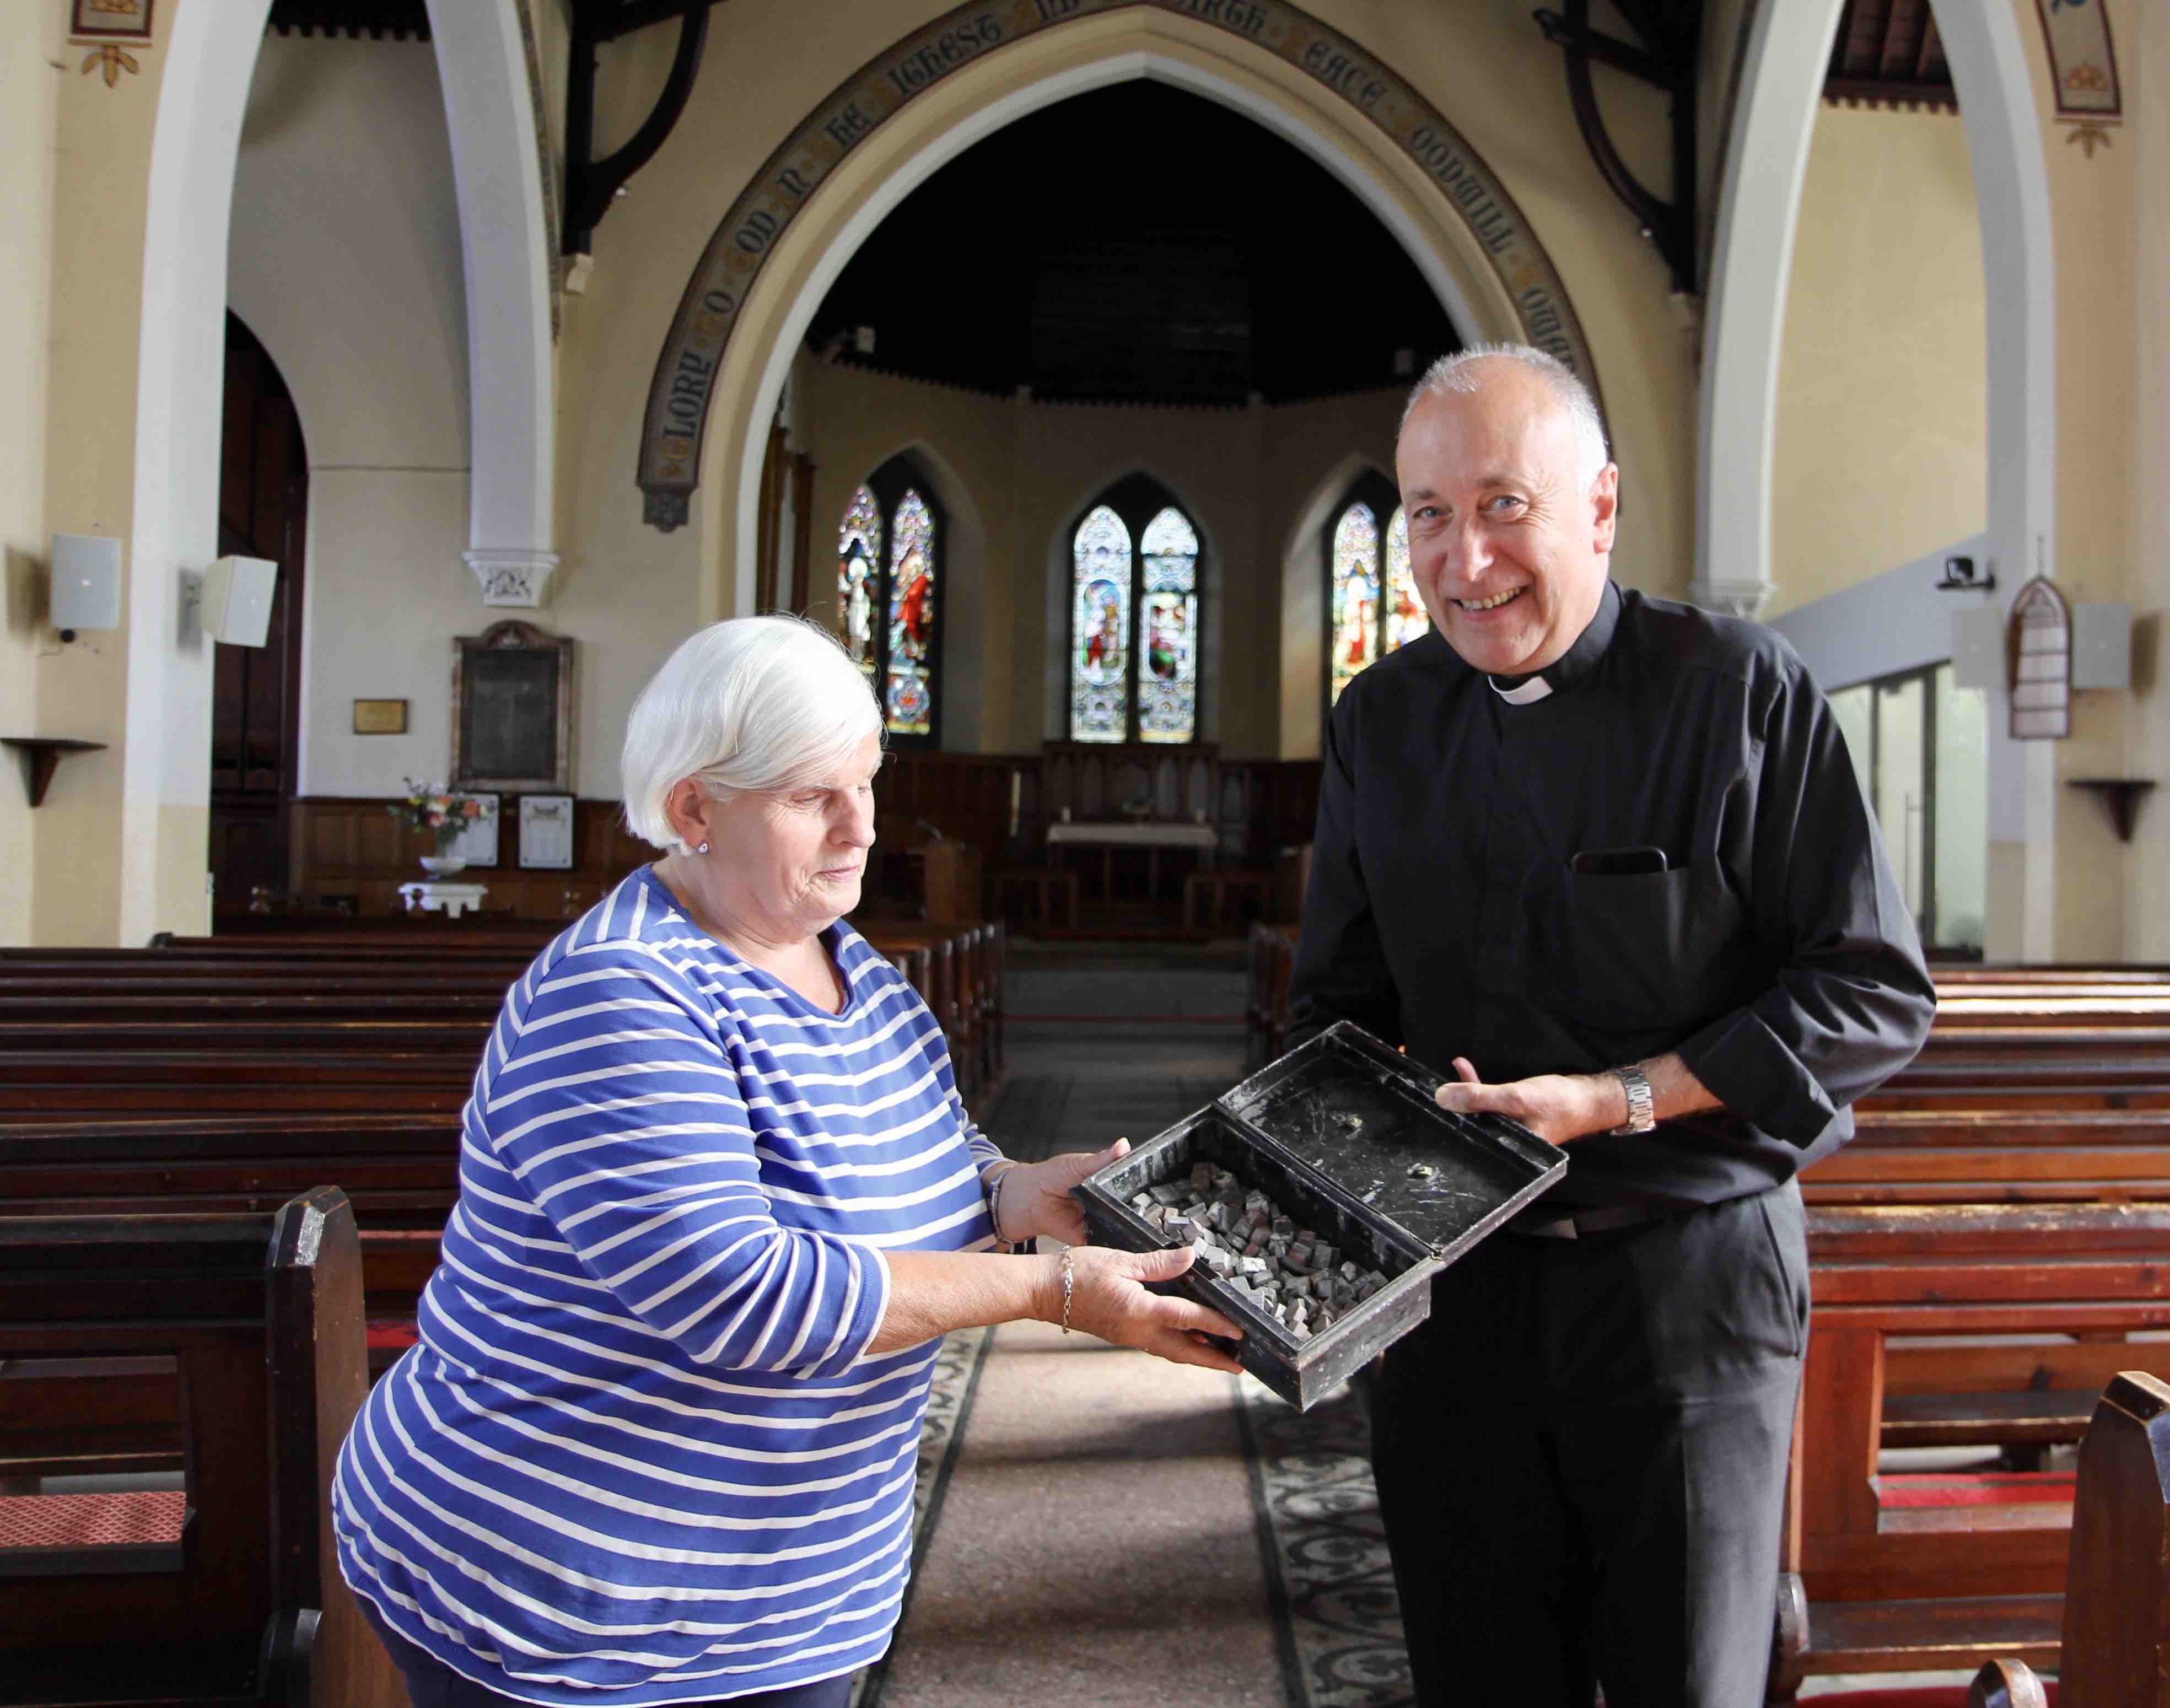 Longstanding parishioner Gladys Raethorne and Canon Leonard Ruddock examine the mosaic tiles which date from the church's extension in 1879.